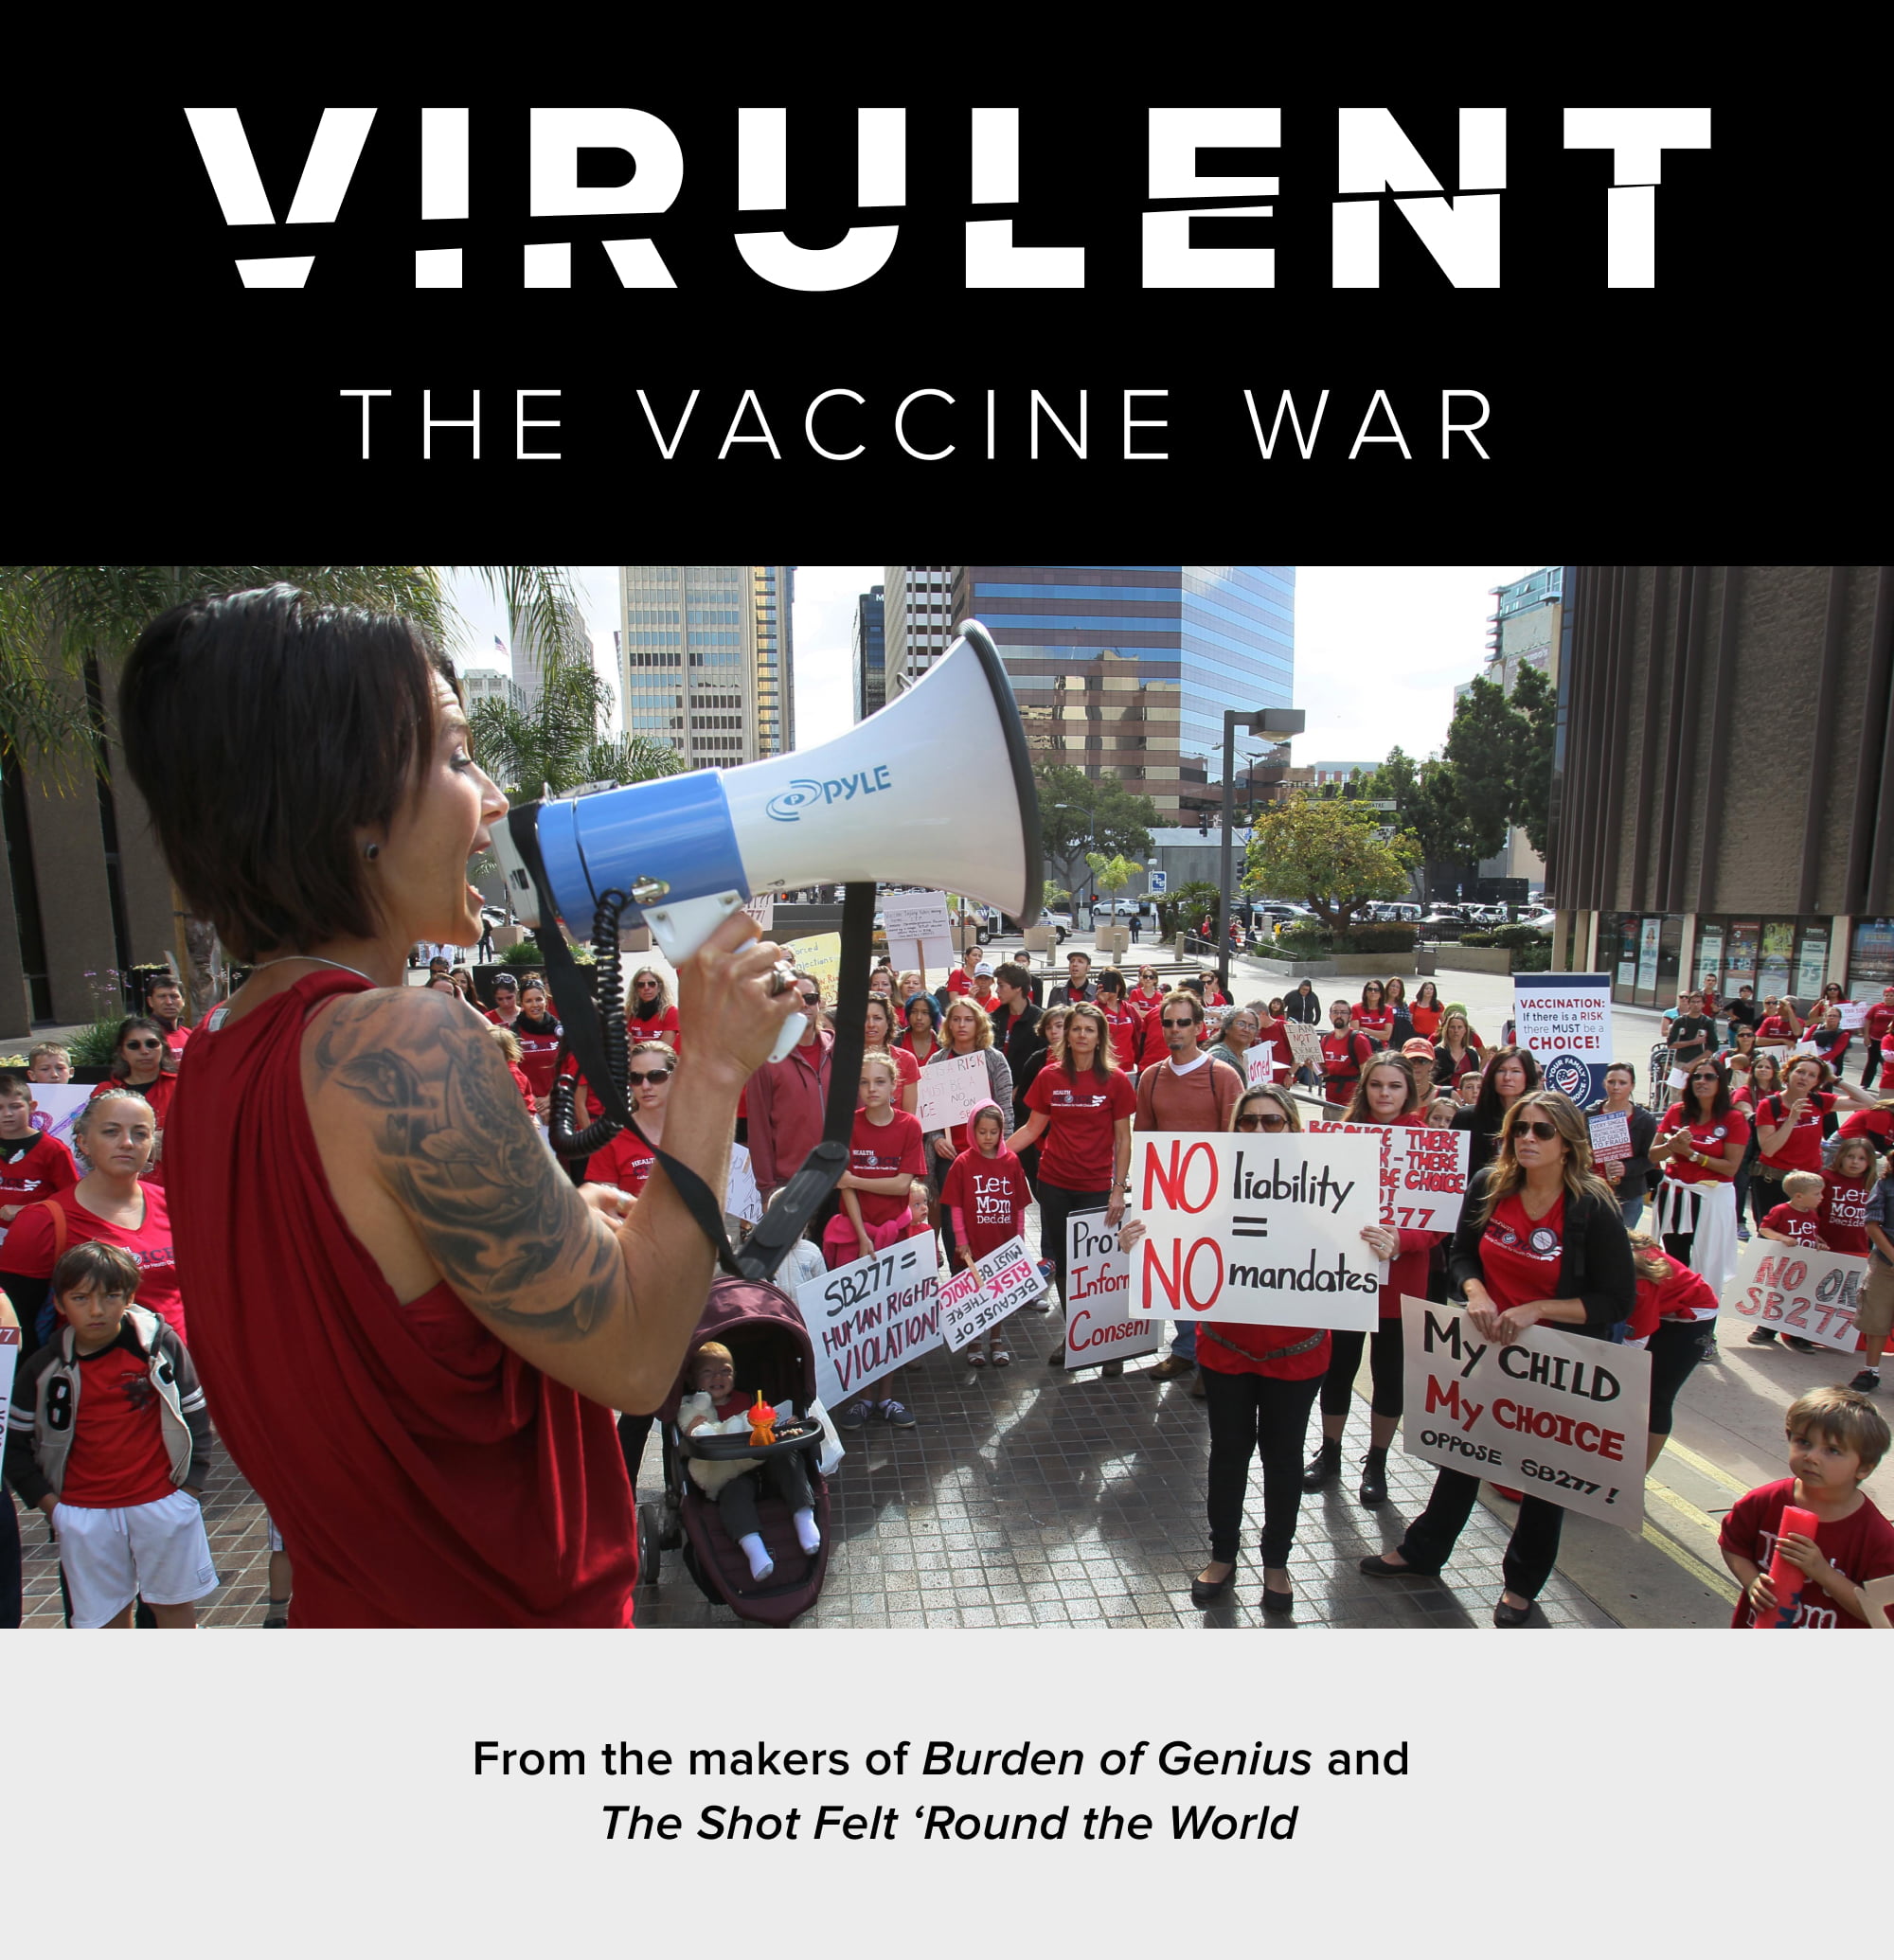 Virulent The Vaccine War Documentary To Be Screened at AAP NCE